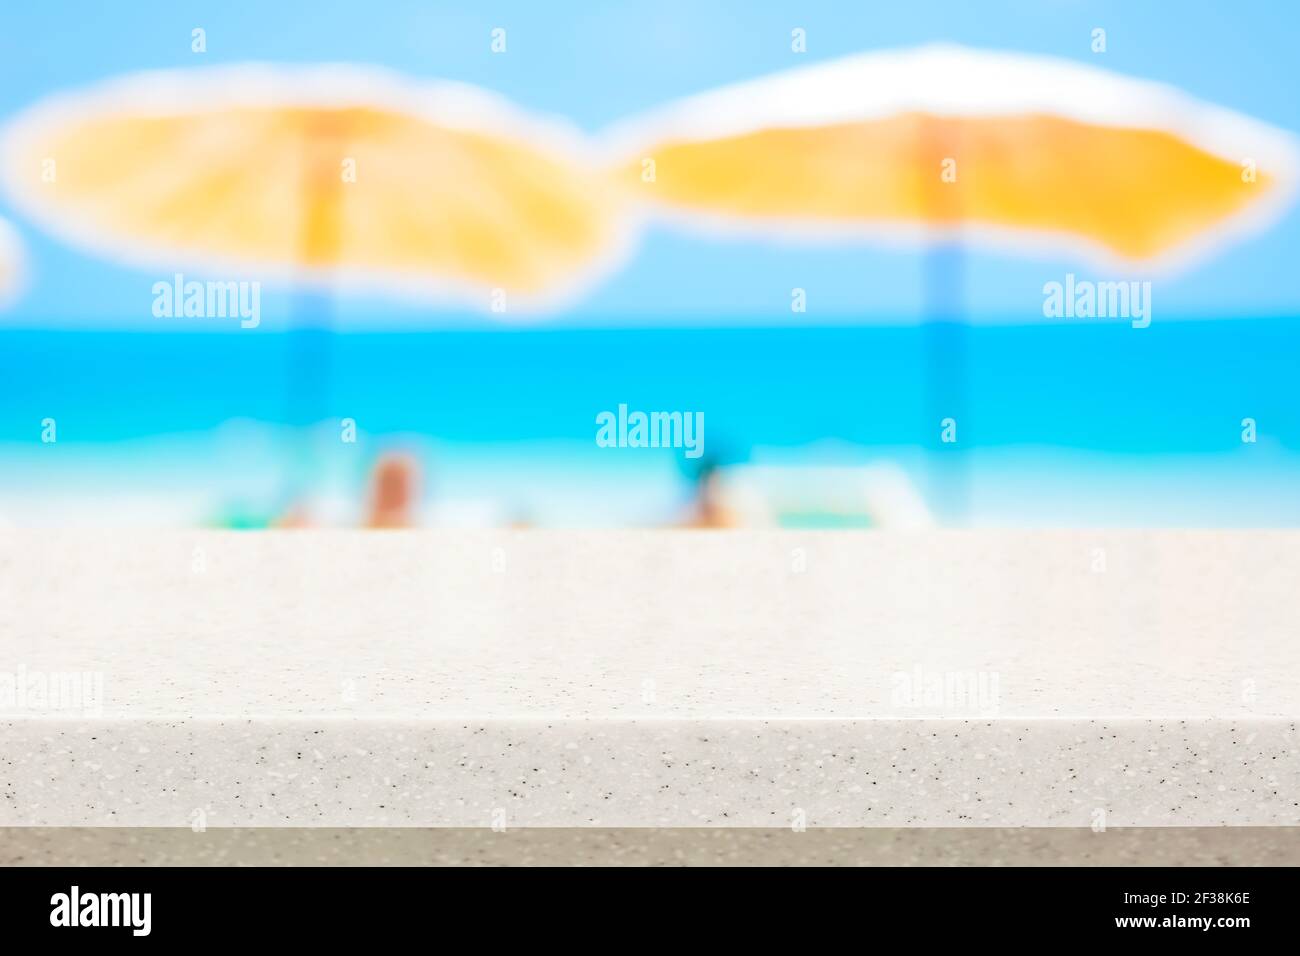 White stone countertop on blurred summer beach background - can be used for display or montage your products Stock Photo